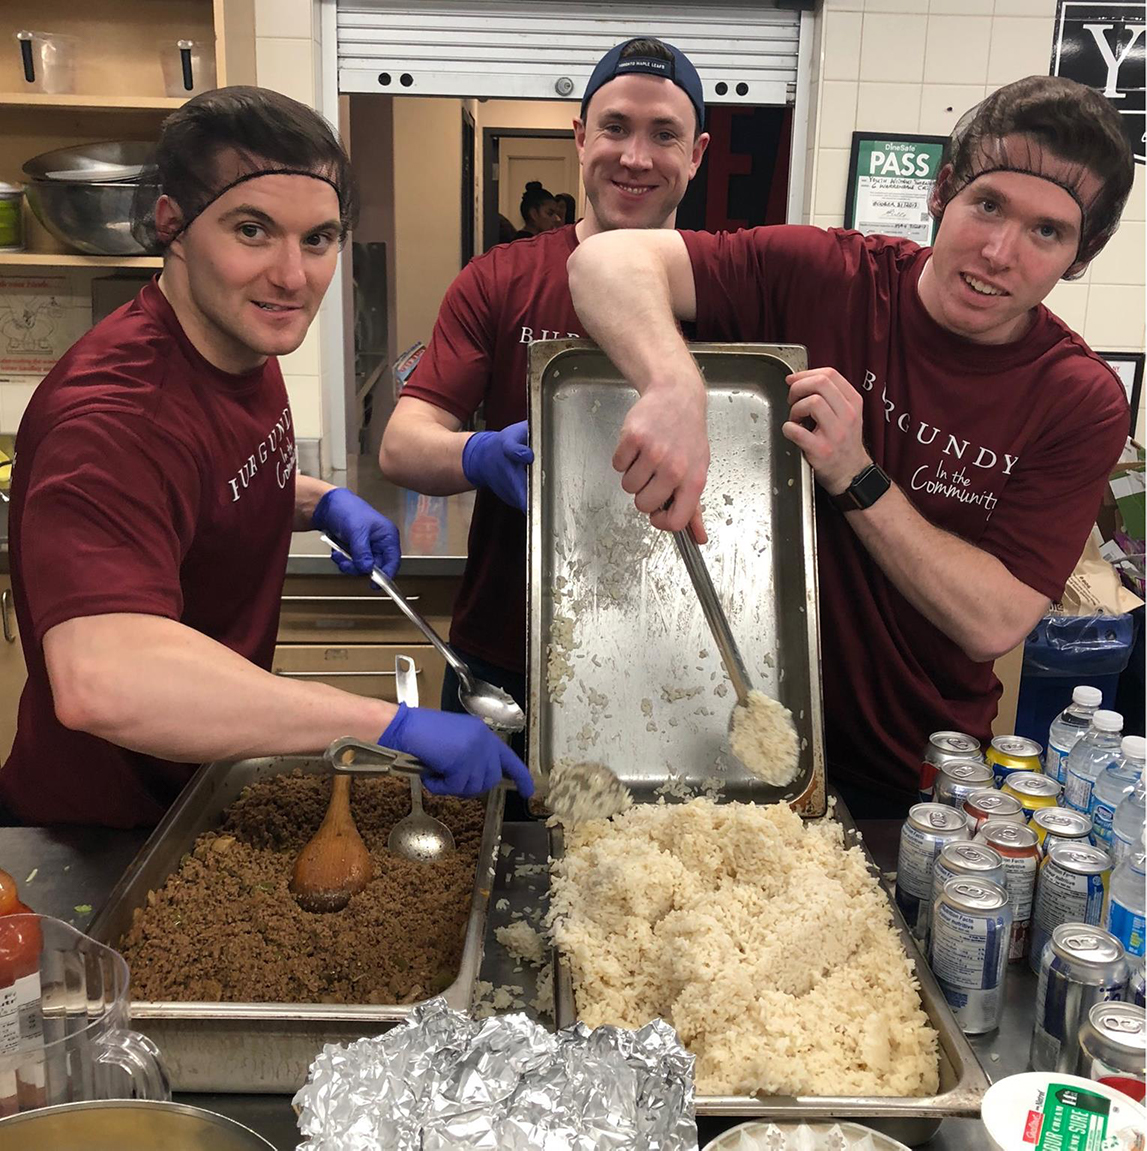 Three BAM volunteers serving food at a kitchen